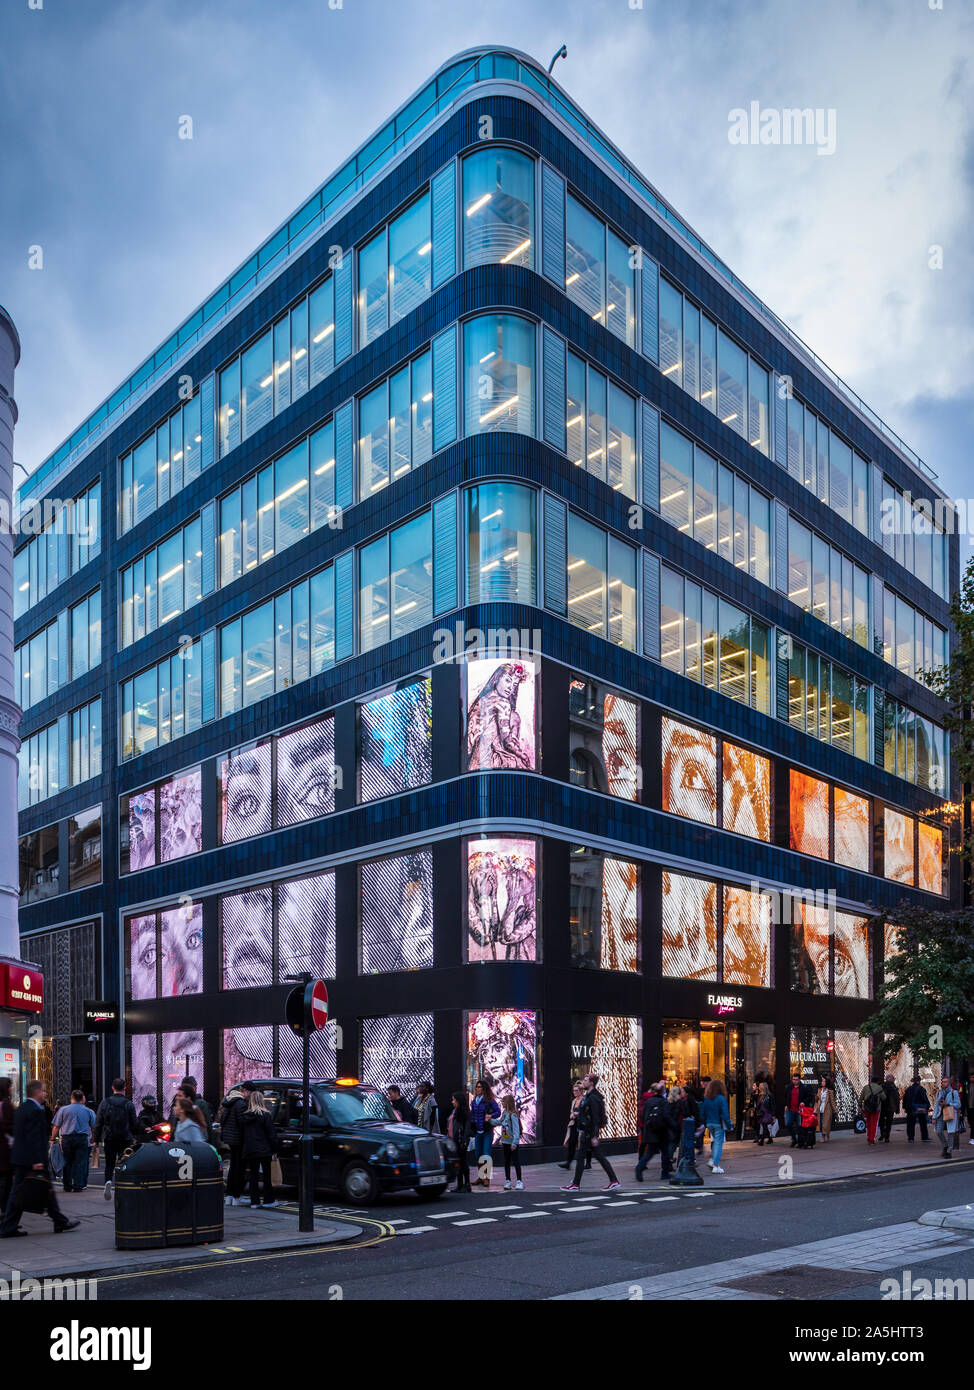 Flannels Oxford Street London - refurbished Academy House Oxford Street London - the Flannels flagship store, Sports Direct & Frasers Group London HQ Stock Photo